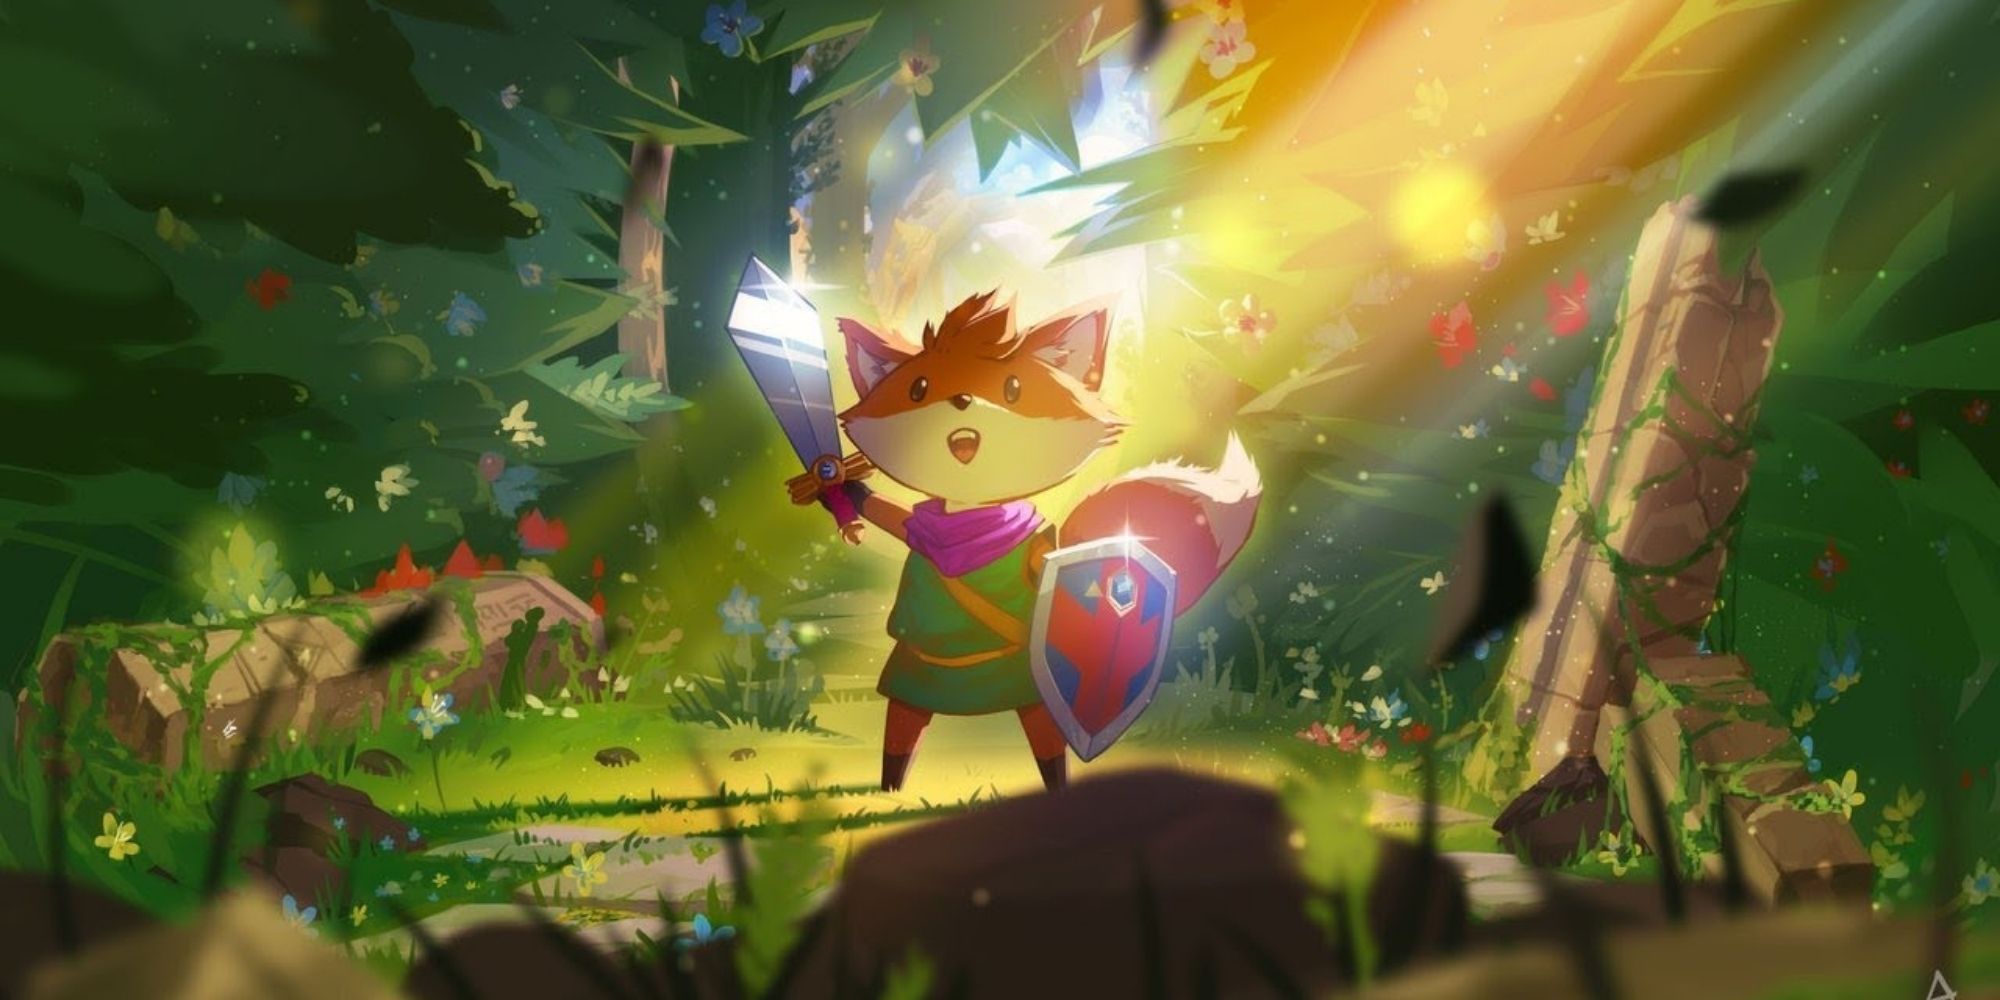 Tunic Fox Holds Sword Into The Air In A Beautiful Forest